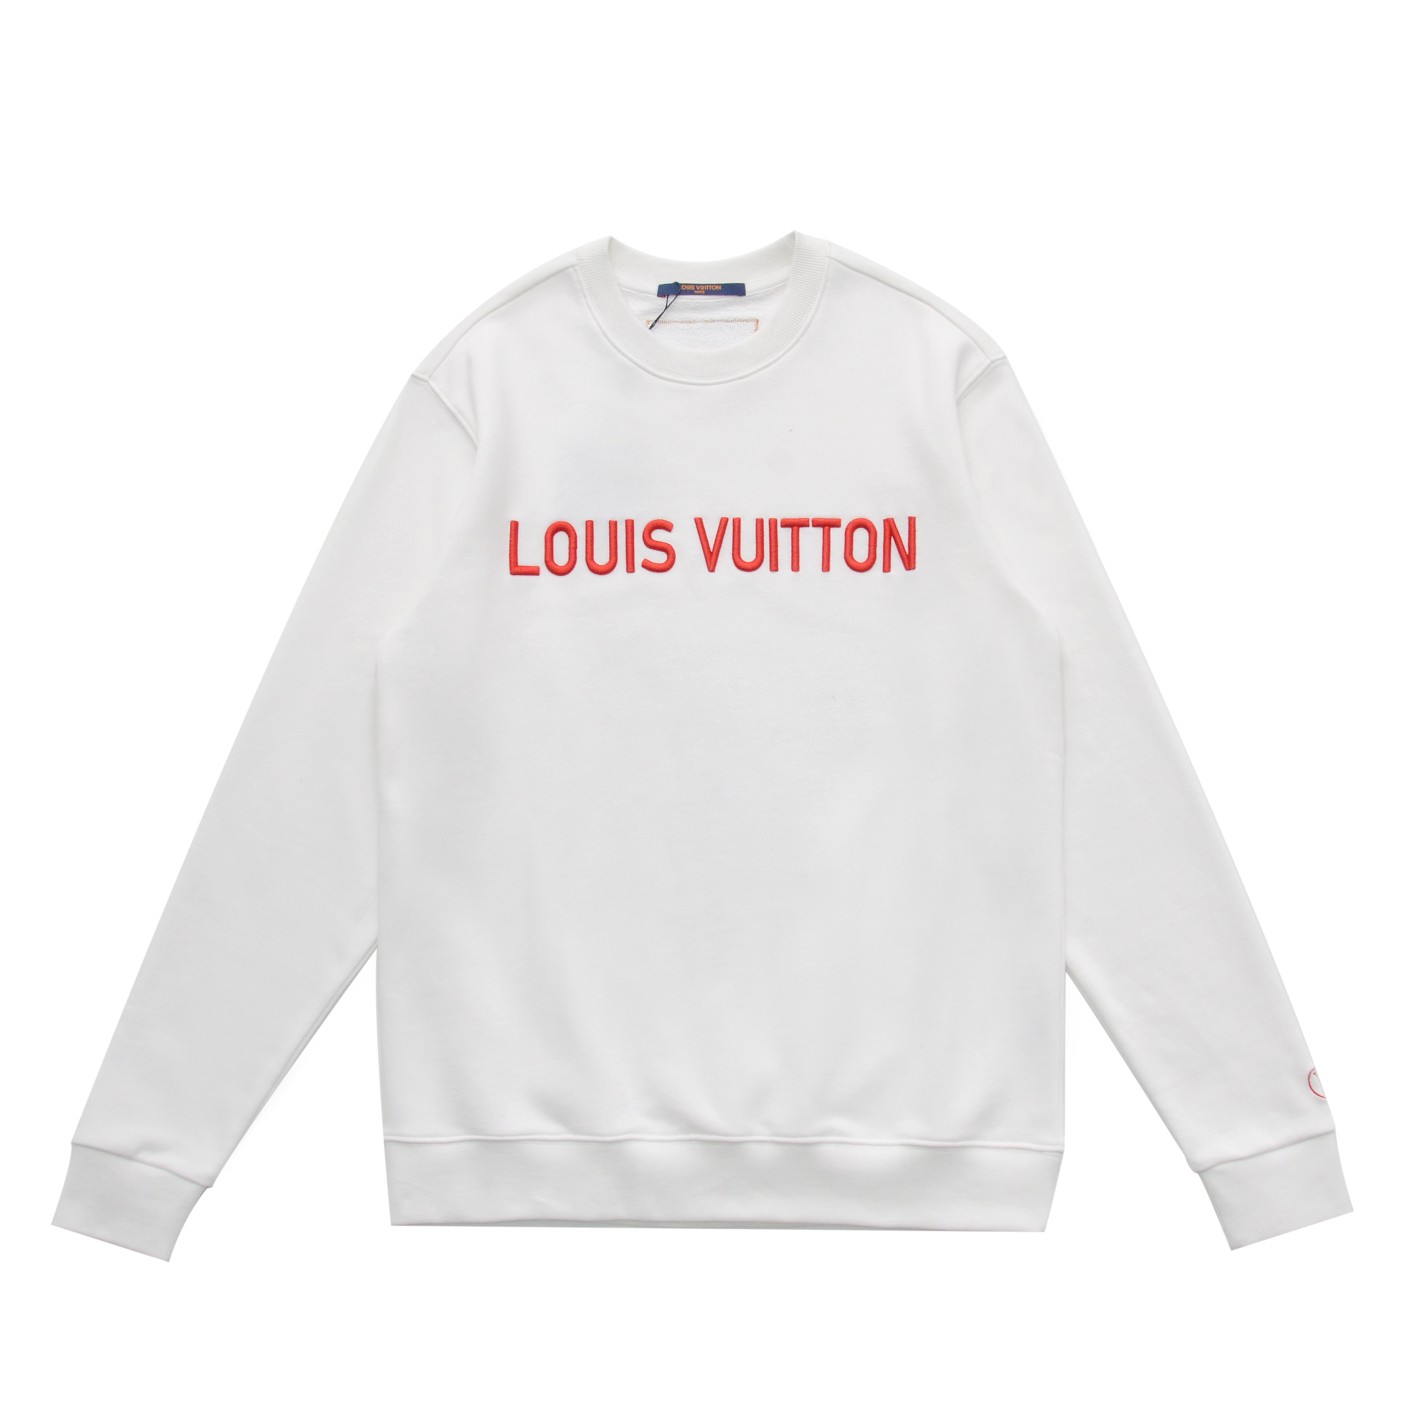 Louis Vuitton AAAAA
 Clothing Sweatshirts Black Red White Embroidery Unisex Fall/Winter Collection